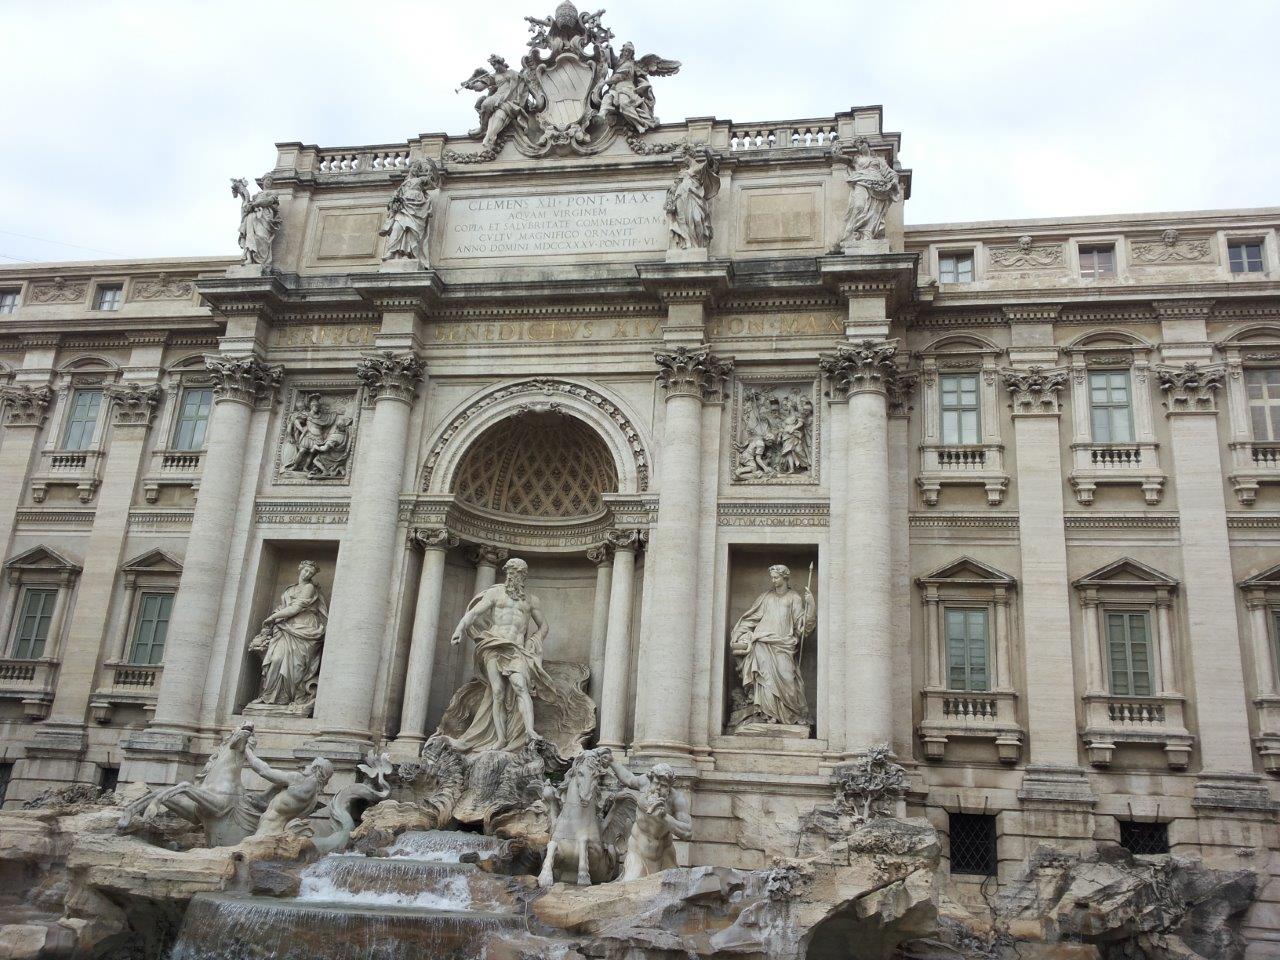 What to see do in Rome in 24 hours - trevi fountain rome italy